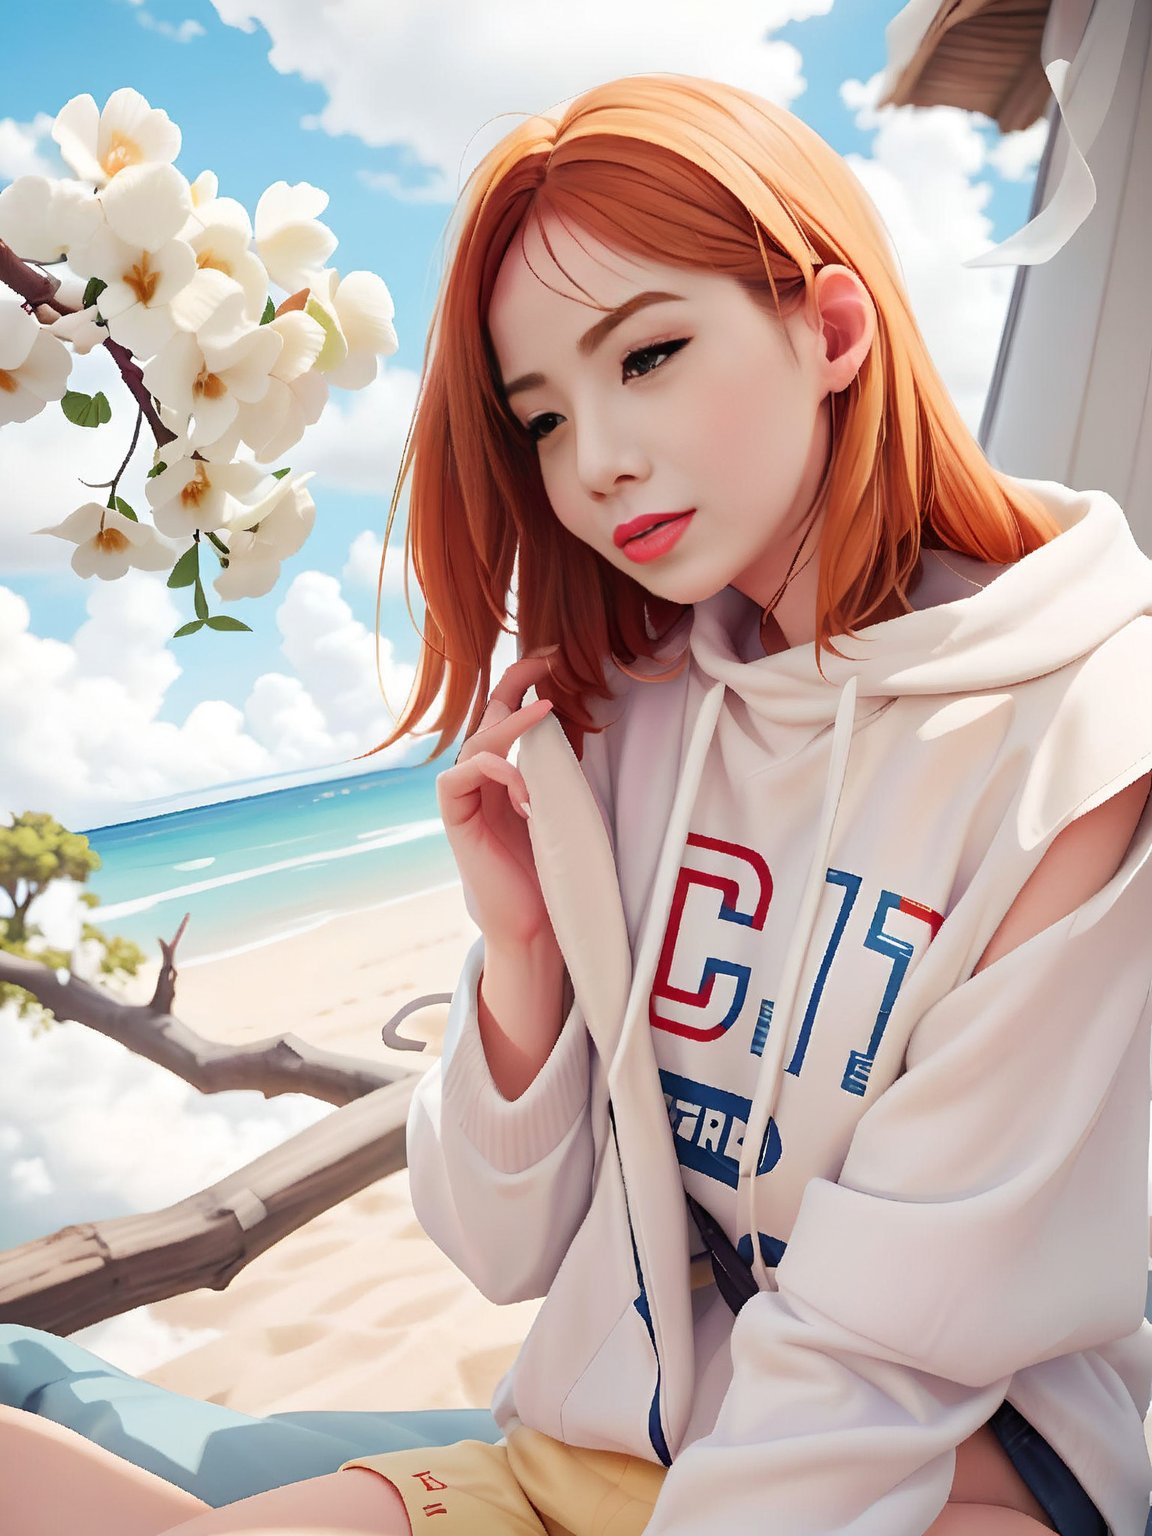 In a warm, golden-lit afternoon setting, a woman sits serenely on a worn wooden bench, her slender fingers cradling a delicate flower. Softly focused, the background blends into a gentle haze, while the subject's features are rendered with photorealistic precision, akin to Sun Yunjoo's masterful style. Her eyes, like pools of calm water, invite contemplation as she gazes downward, the flower's petals unfolding like a delicate promise. The 4K digital art, reminiscent of Guweiz and Artgerm's work, presents a captivating still life, where realism and anime-inspired beauty converge.